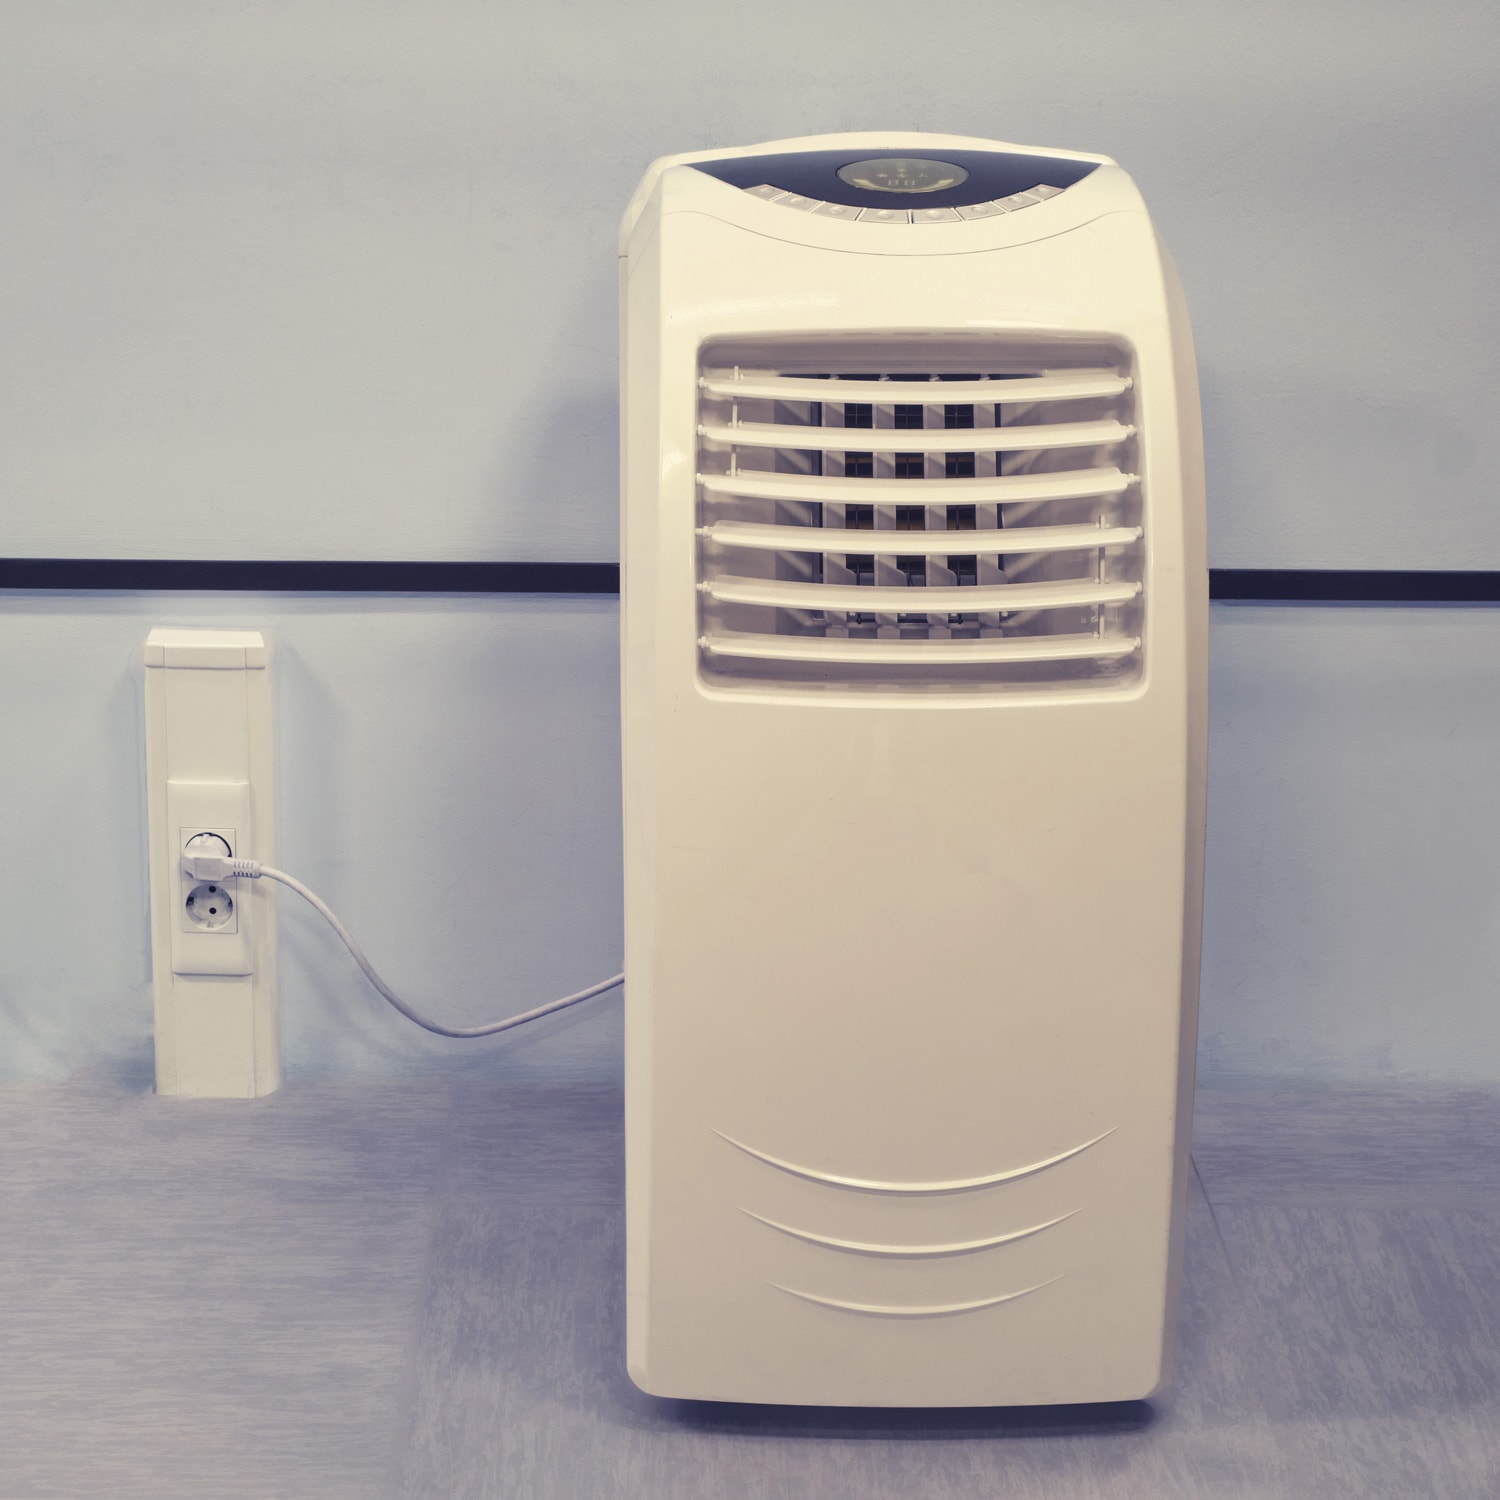 Portable air conditioner in the office connected to an outlet